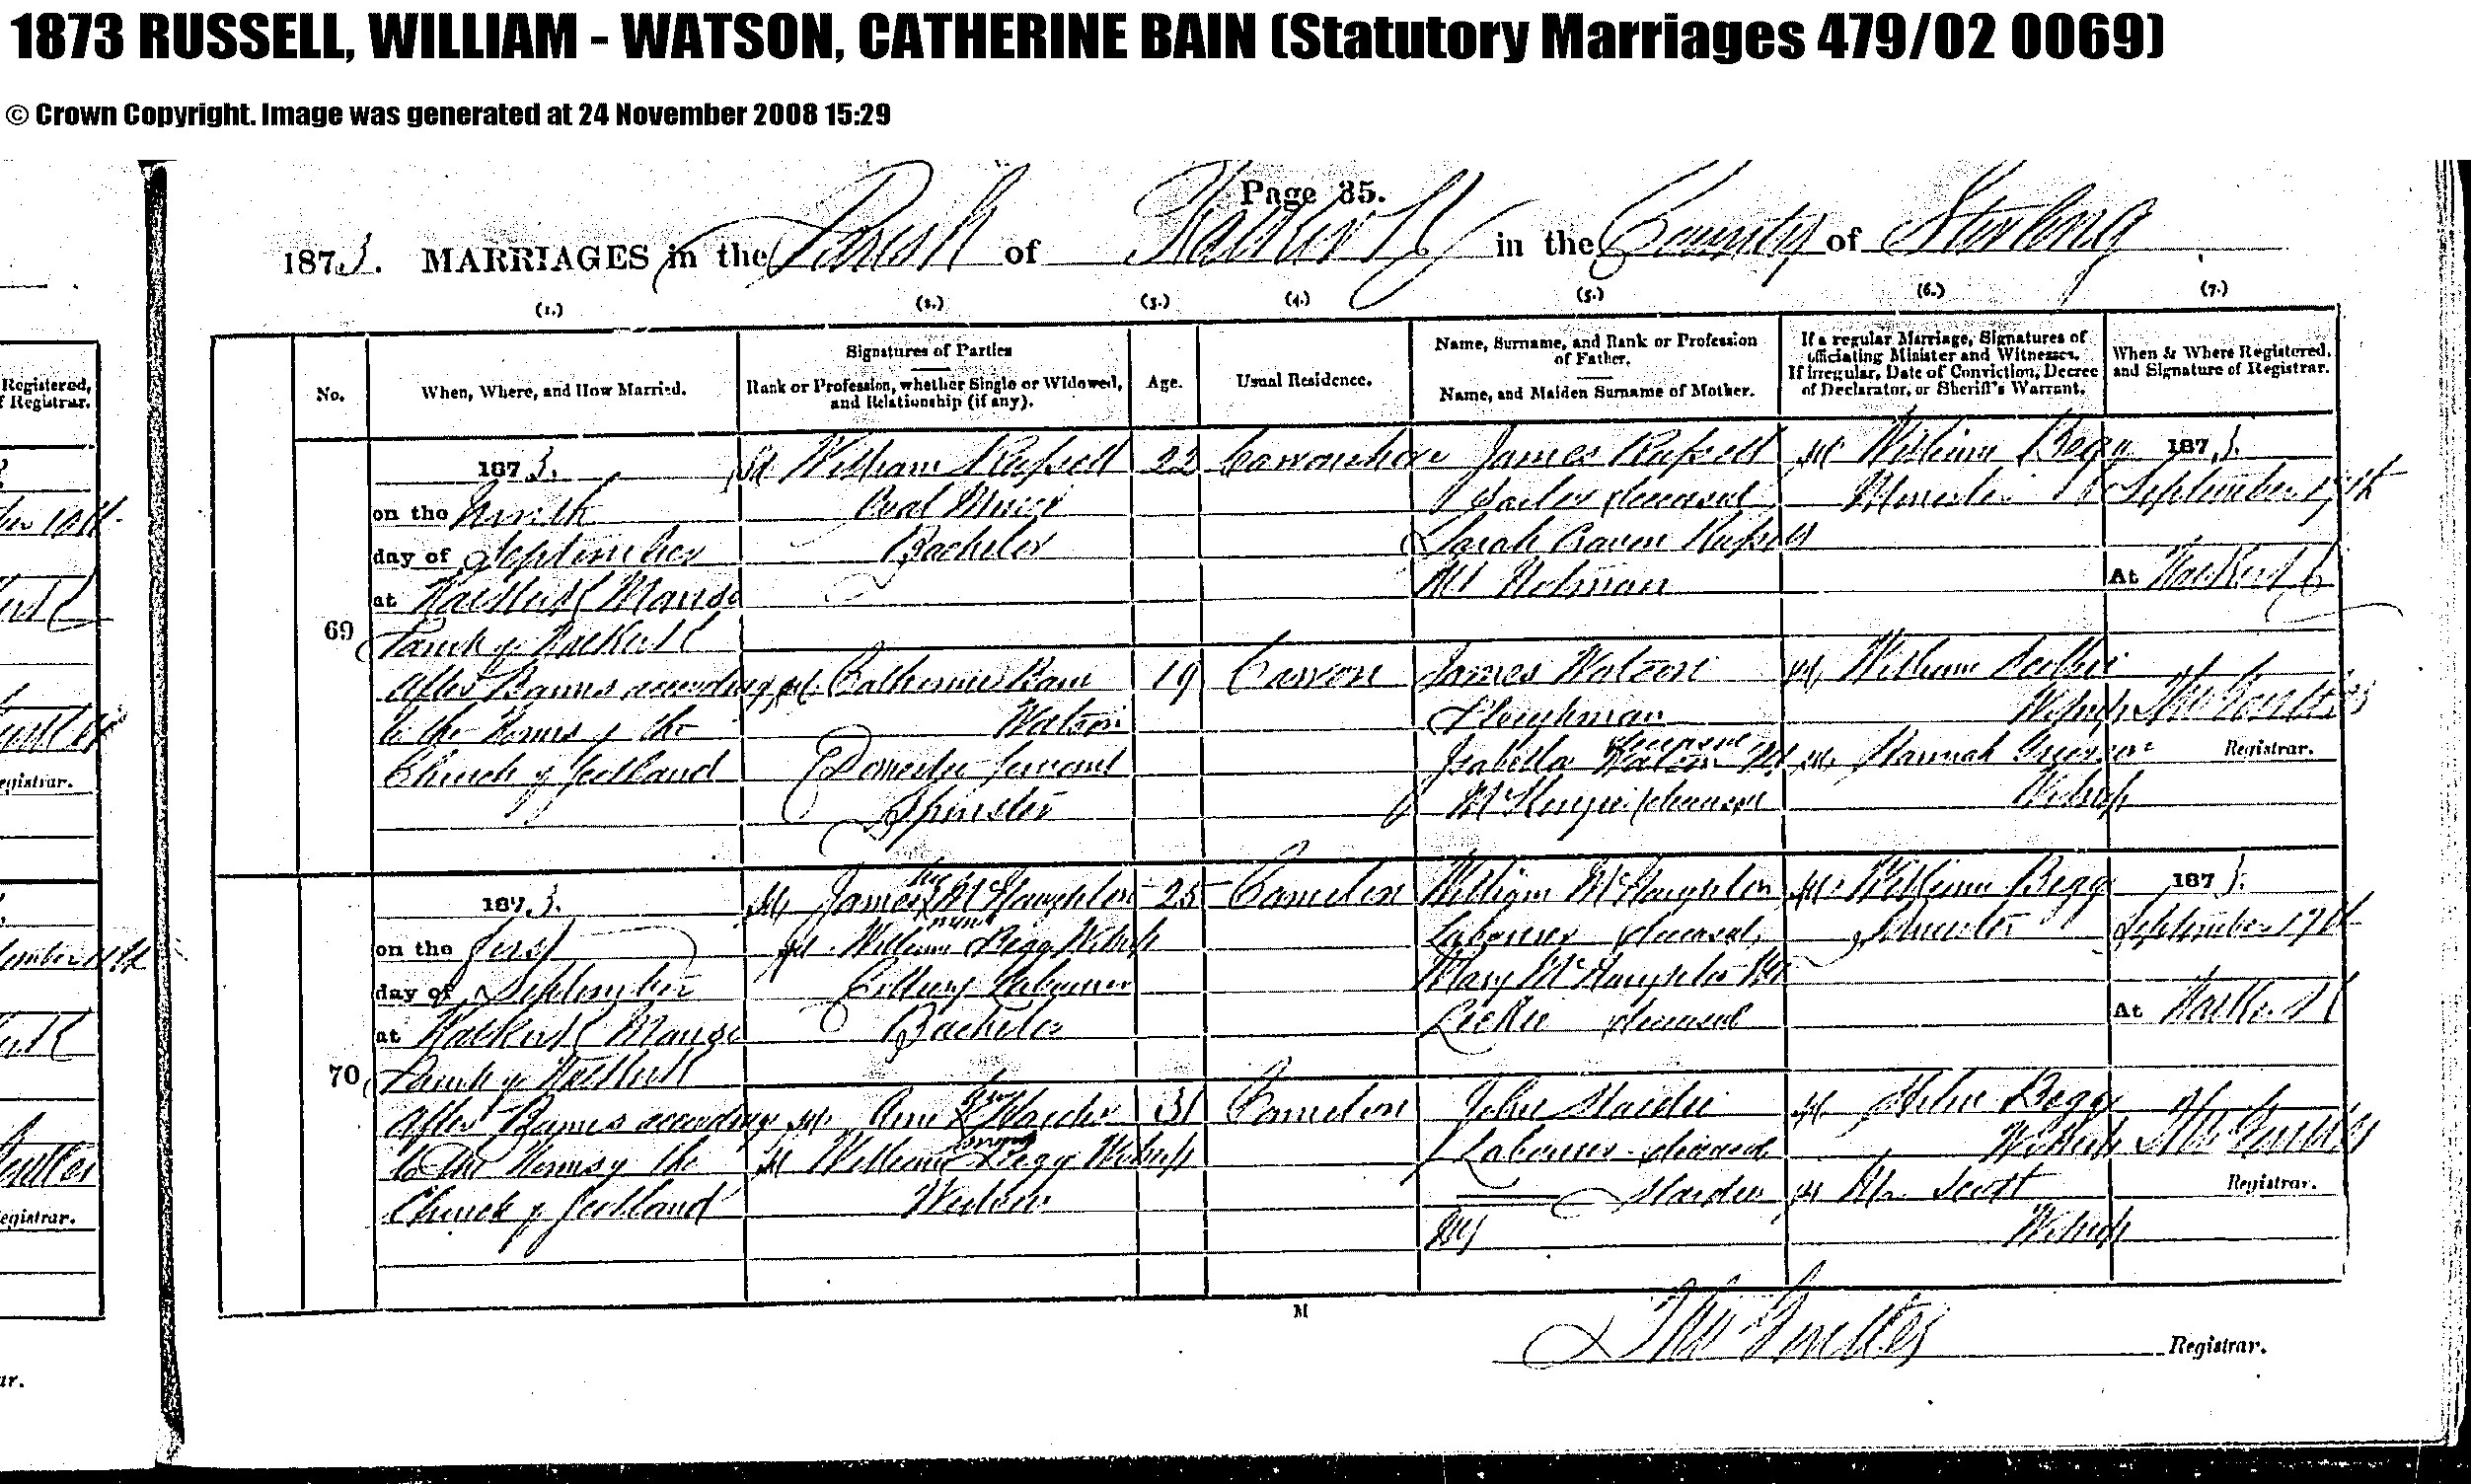 Marriage Certificate 1873 William RUSSELL & Catherine Bain WATSON, September 9, 1873, Linked To: <a href='i932.html' >Catherine Bain Watson</a>